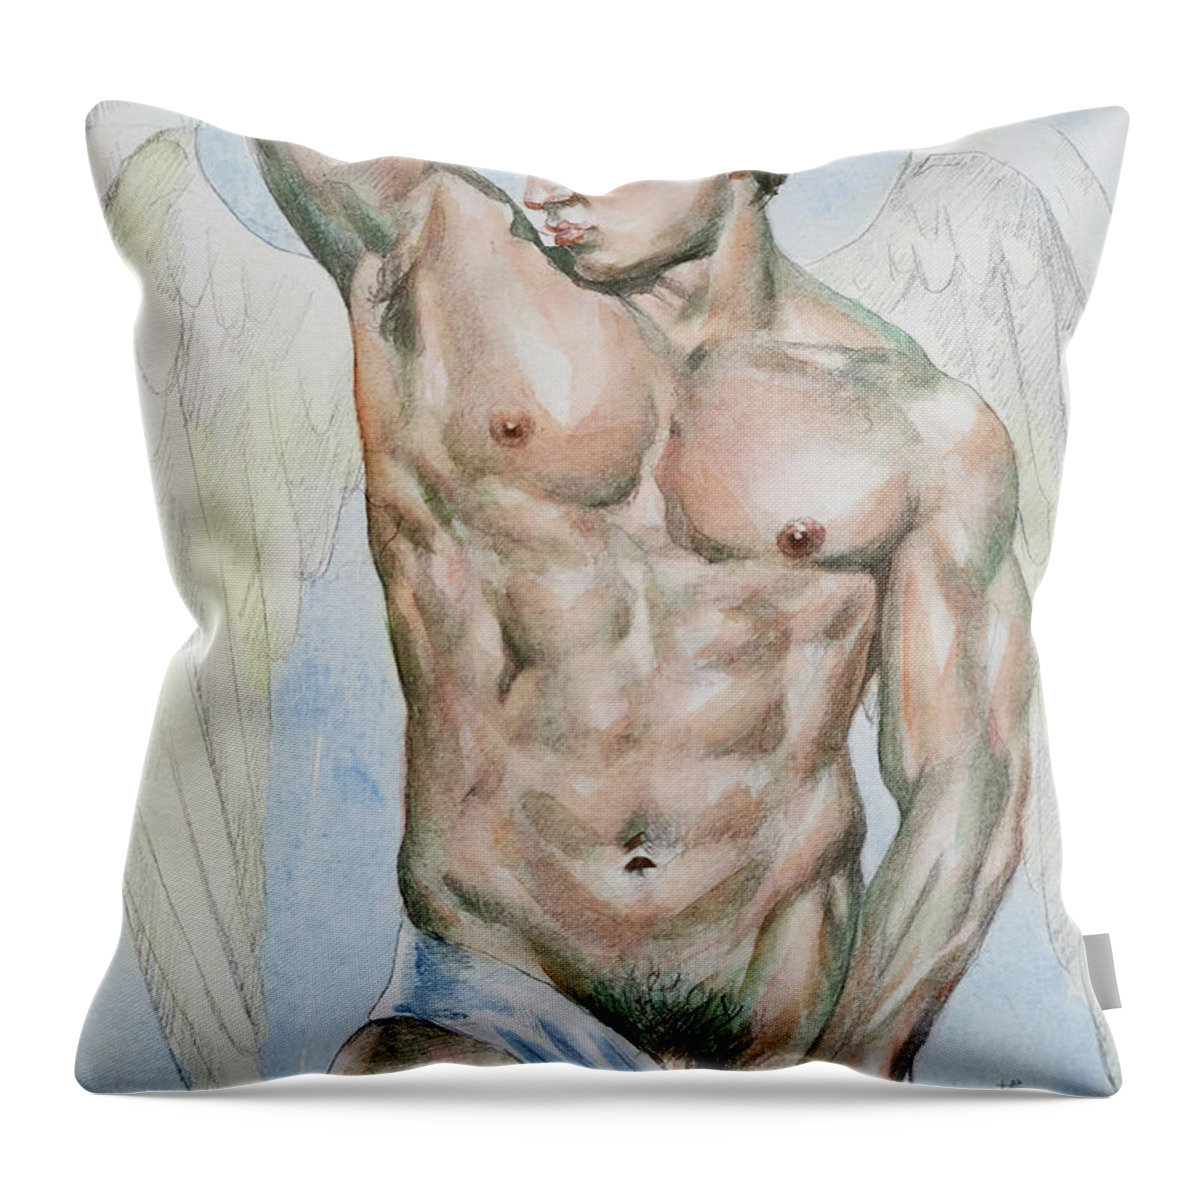 Male Nude Throw Pillow featuring the painting Angel of male nude #20119 by Hongtao Huang